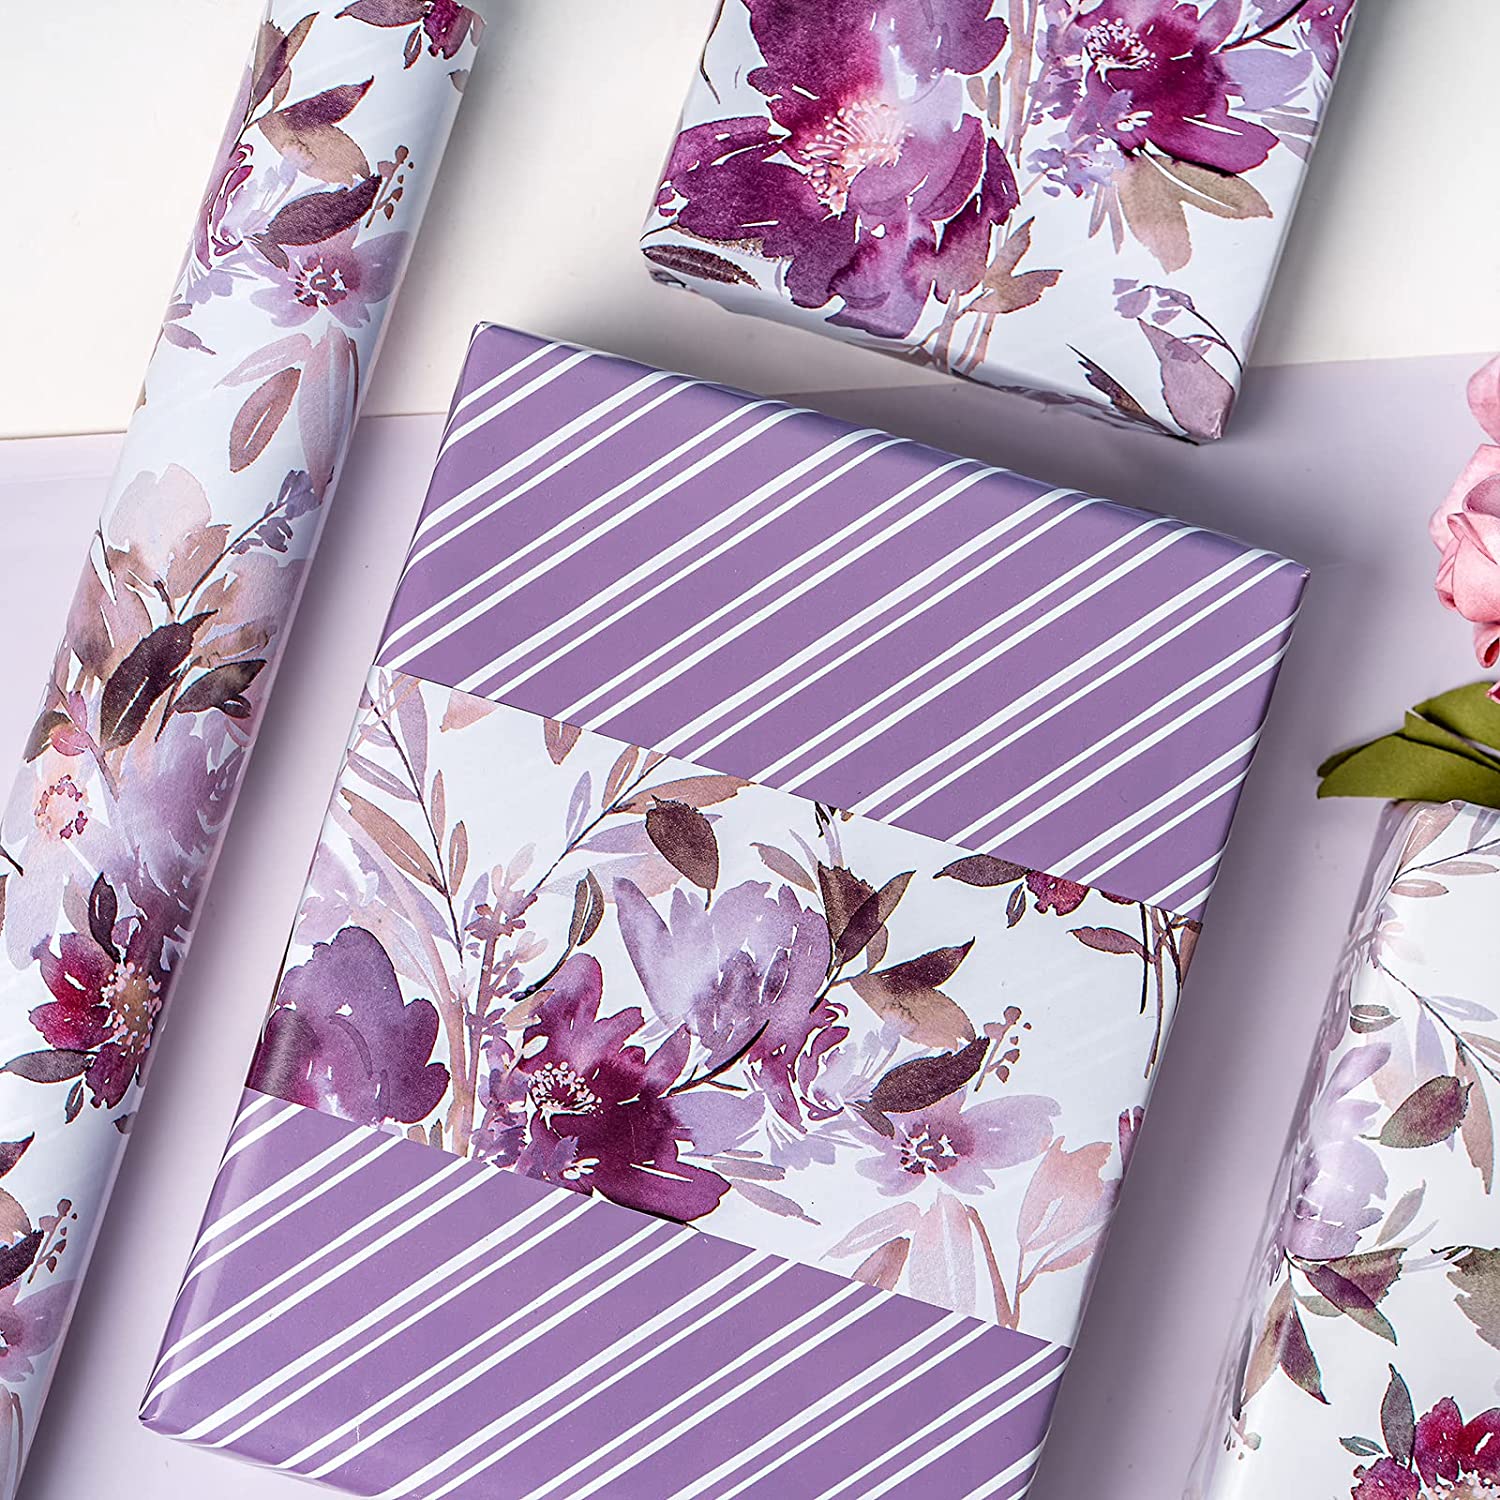 WRAPAHOLIC Reversible Wrapping Paper - Mini Roll - 17 inch x 33 Feet - Beautiful Purple Floral Design for Wedding, Party, Birthday, Holiday, Baby